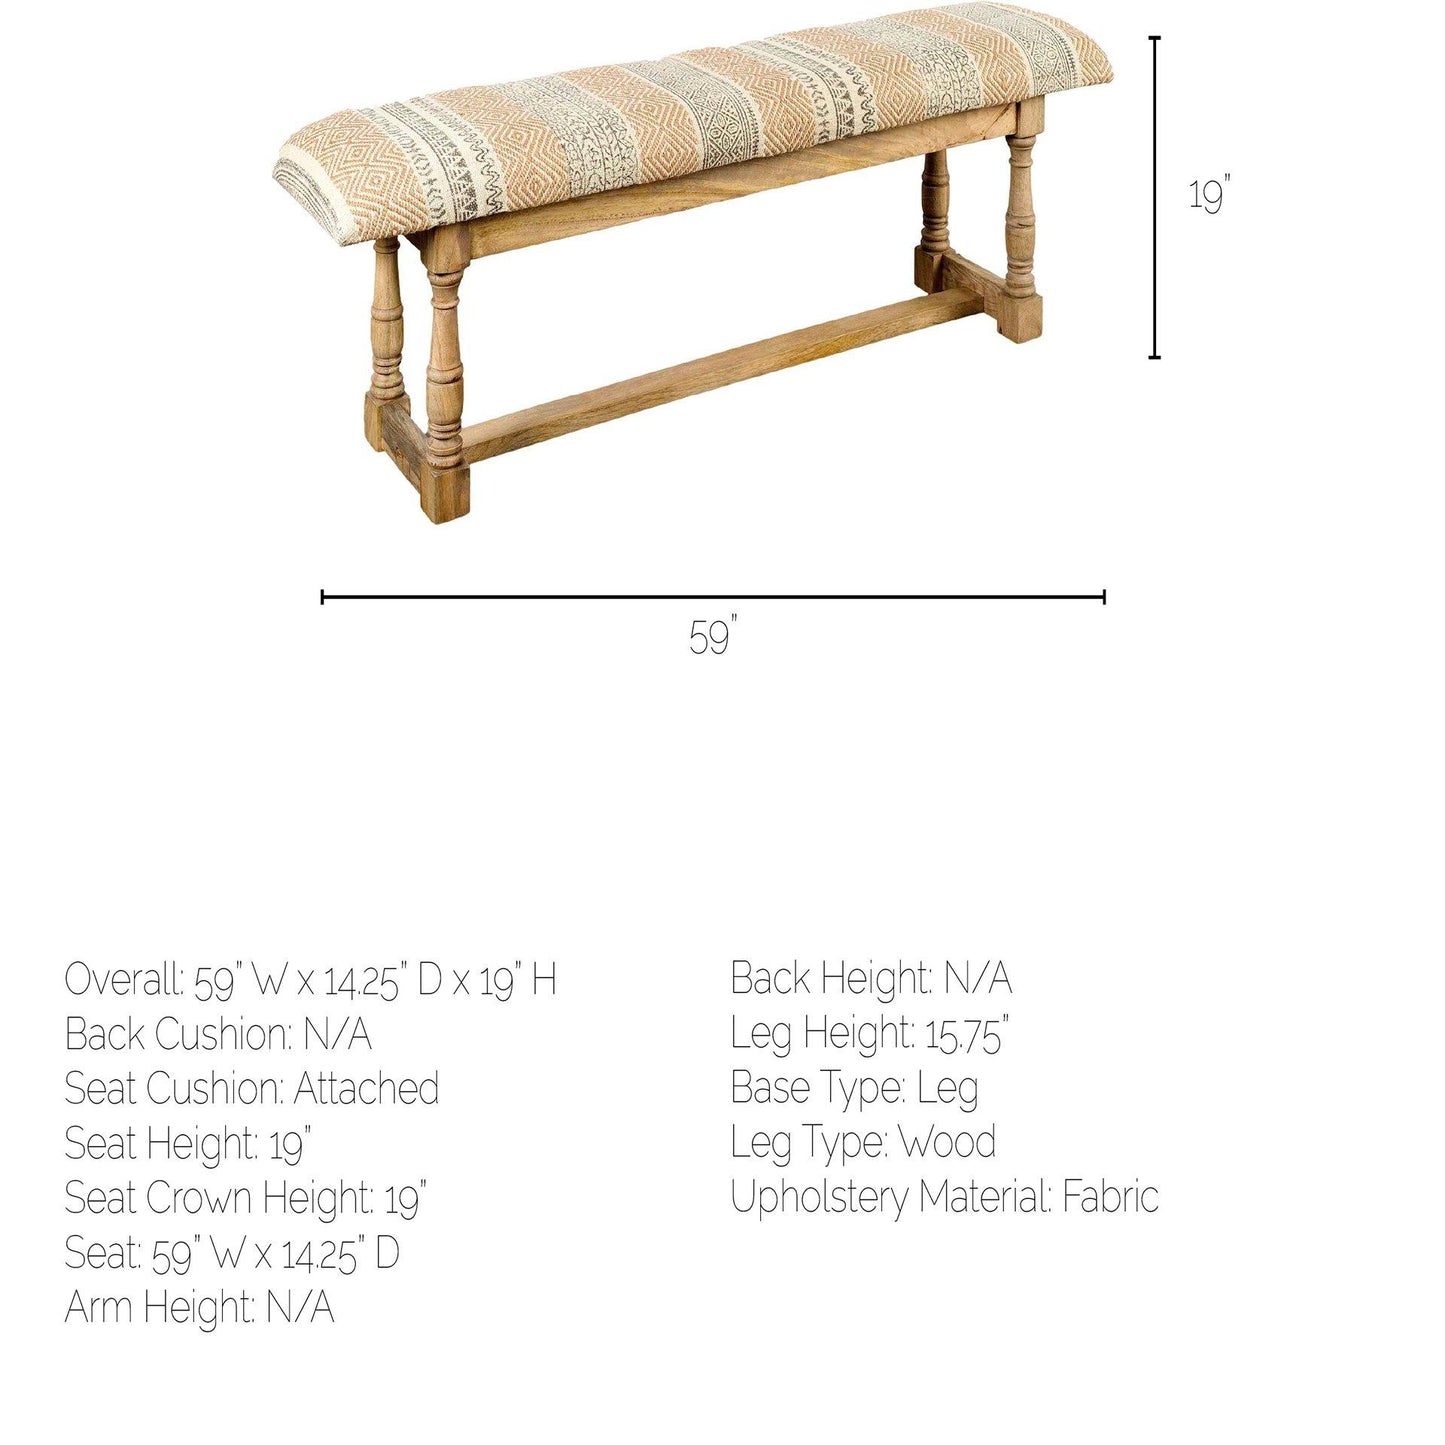 Greenfield II 59L x 14W Patterned Tan Upholstered Wood Frame Accent Bench